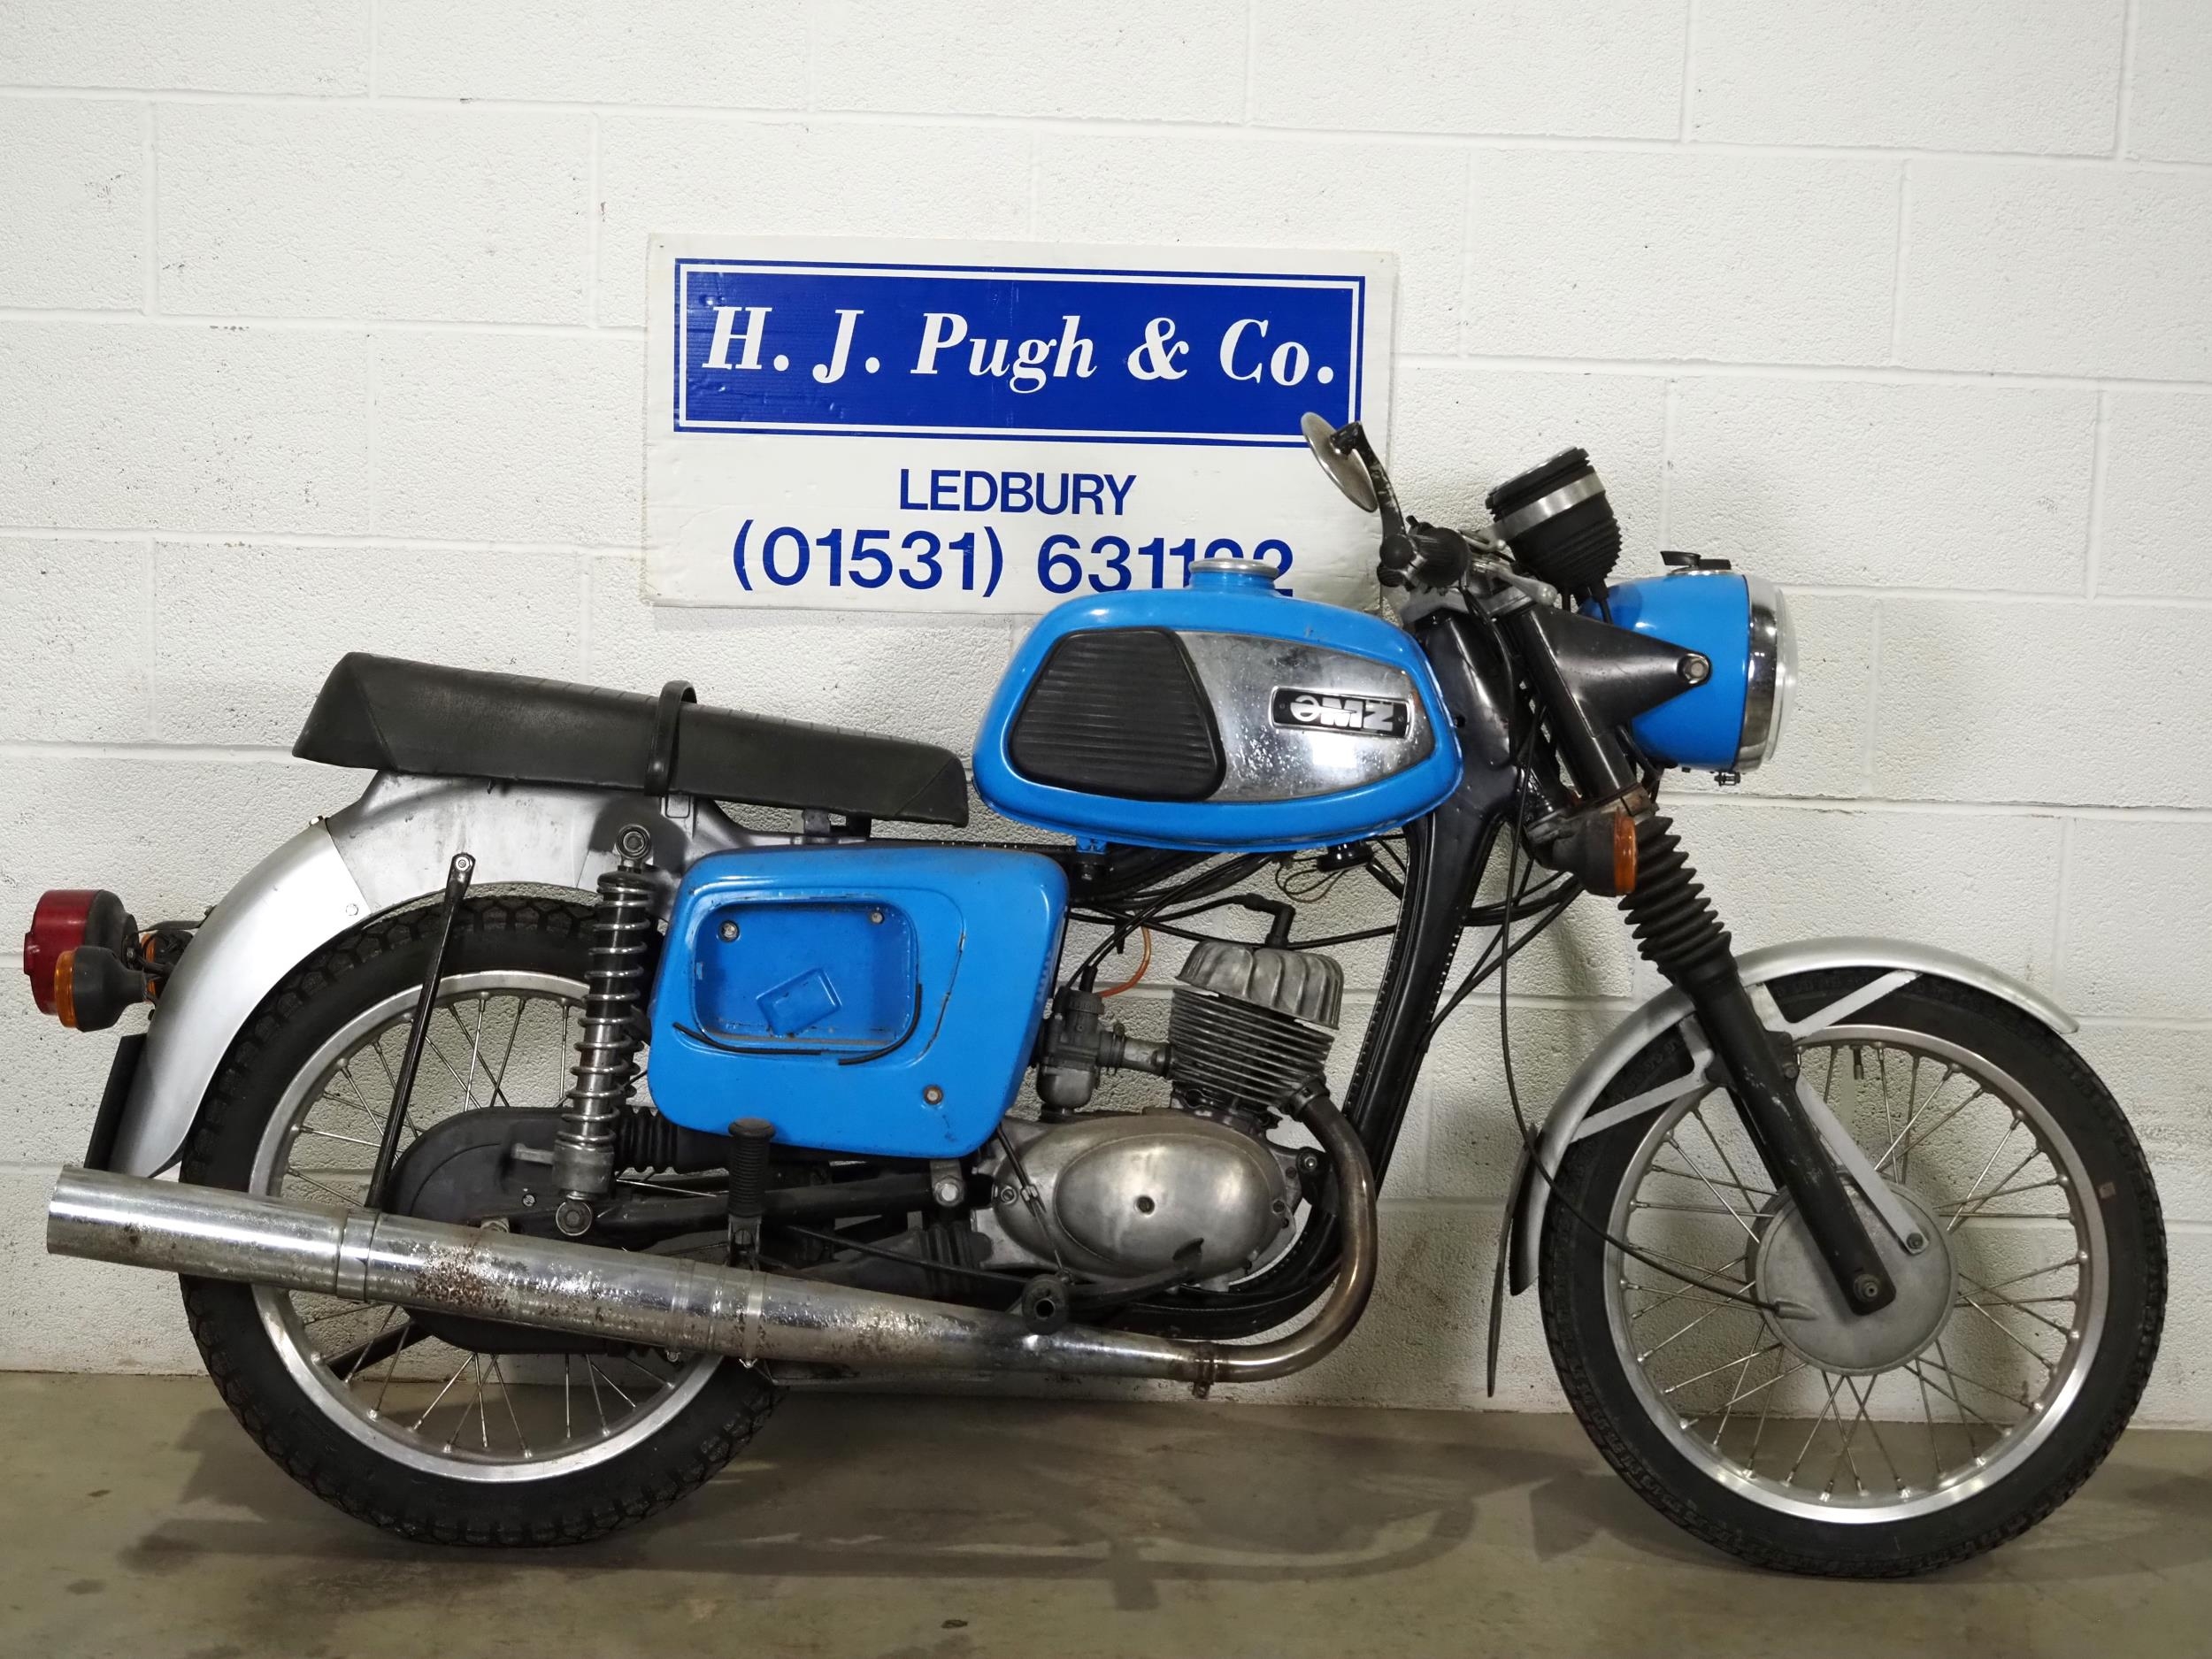 MZ TS125 Motorcycle. 1985. 125cc. Frame no. 8858357 Engine no. 6605216 Been in storage, engine turns